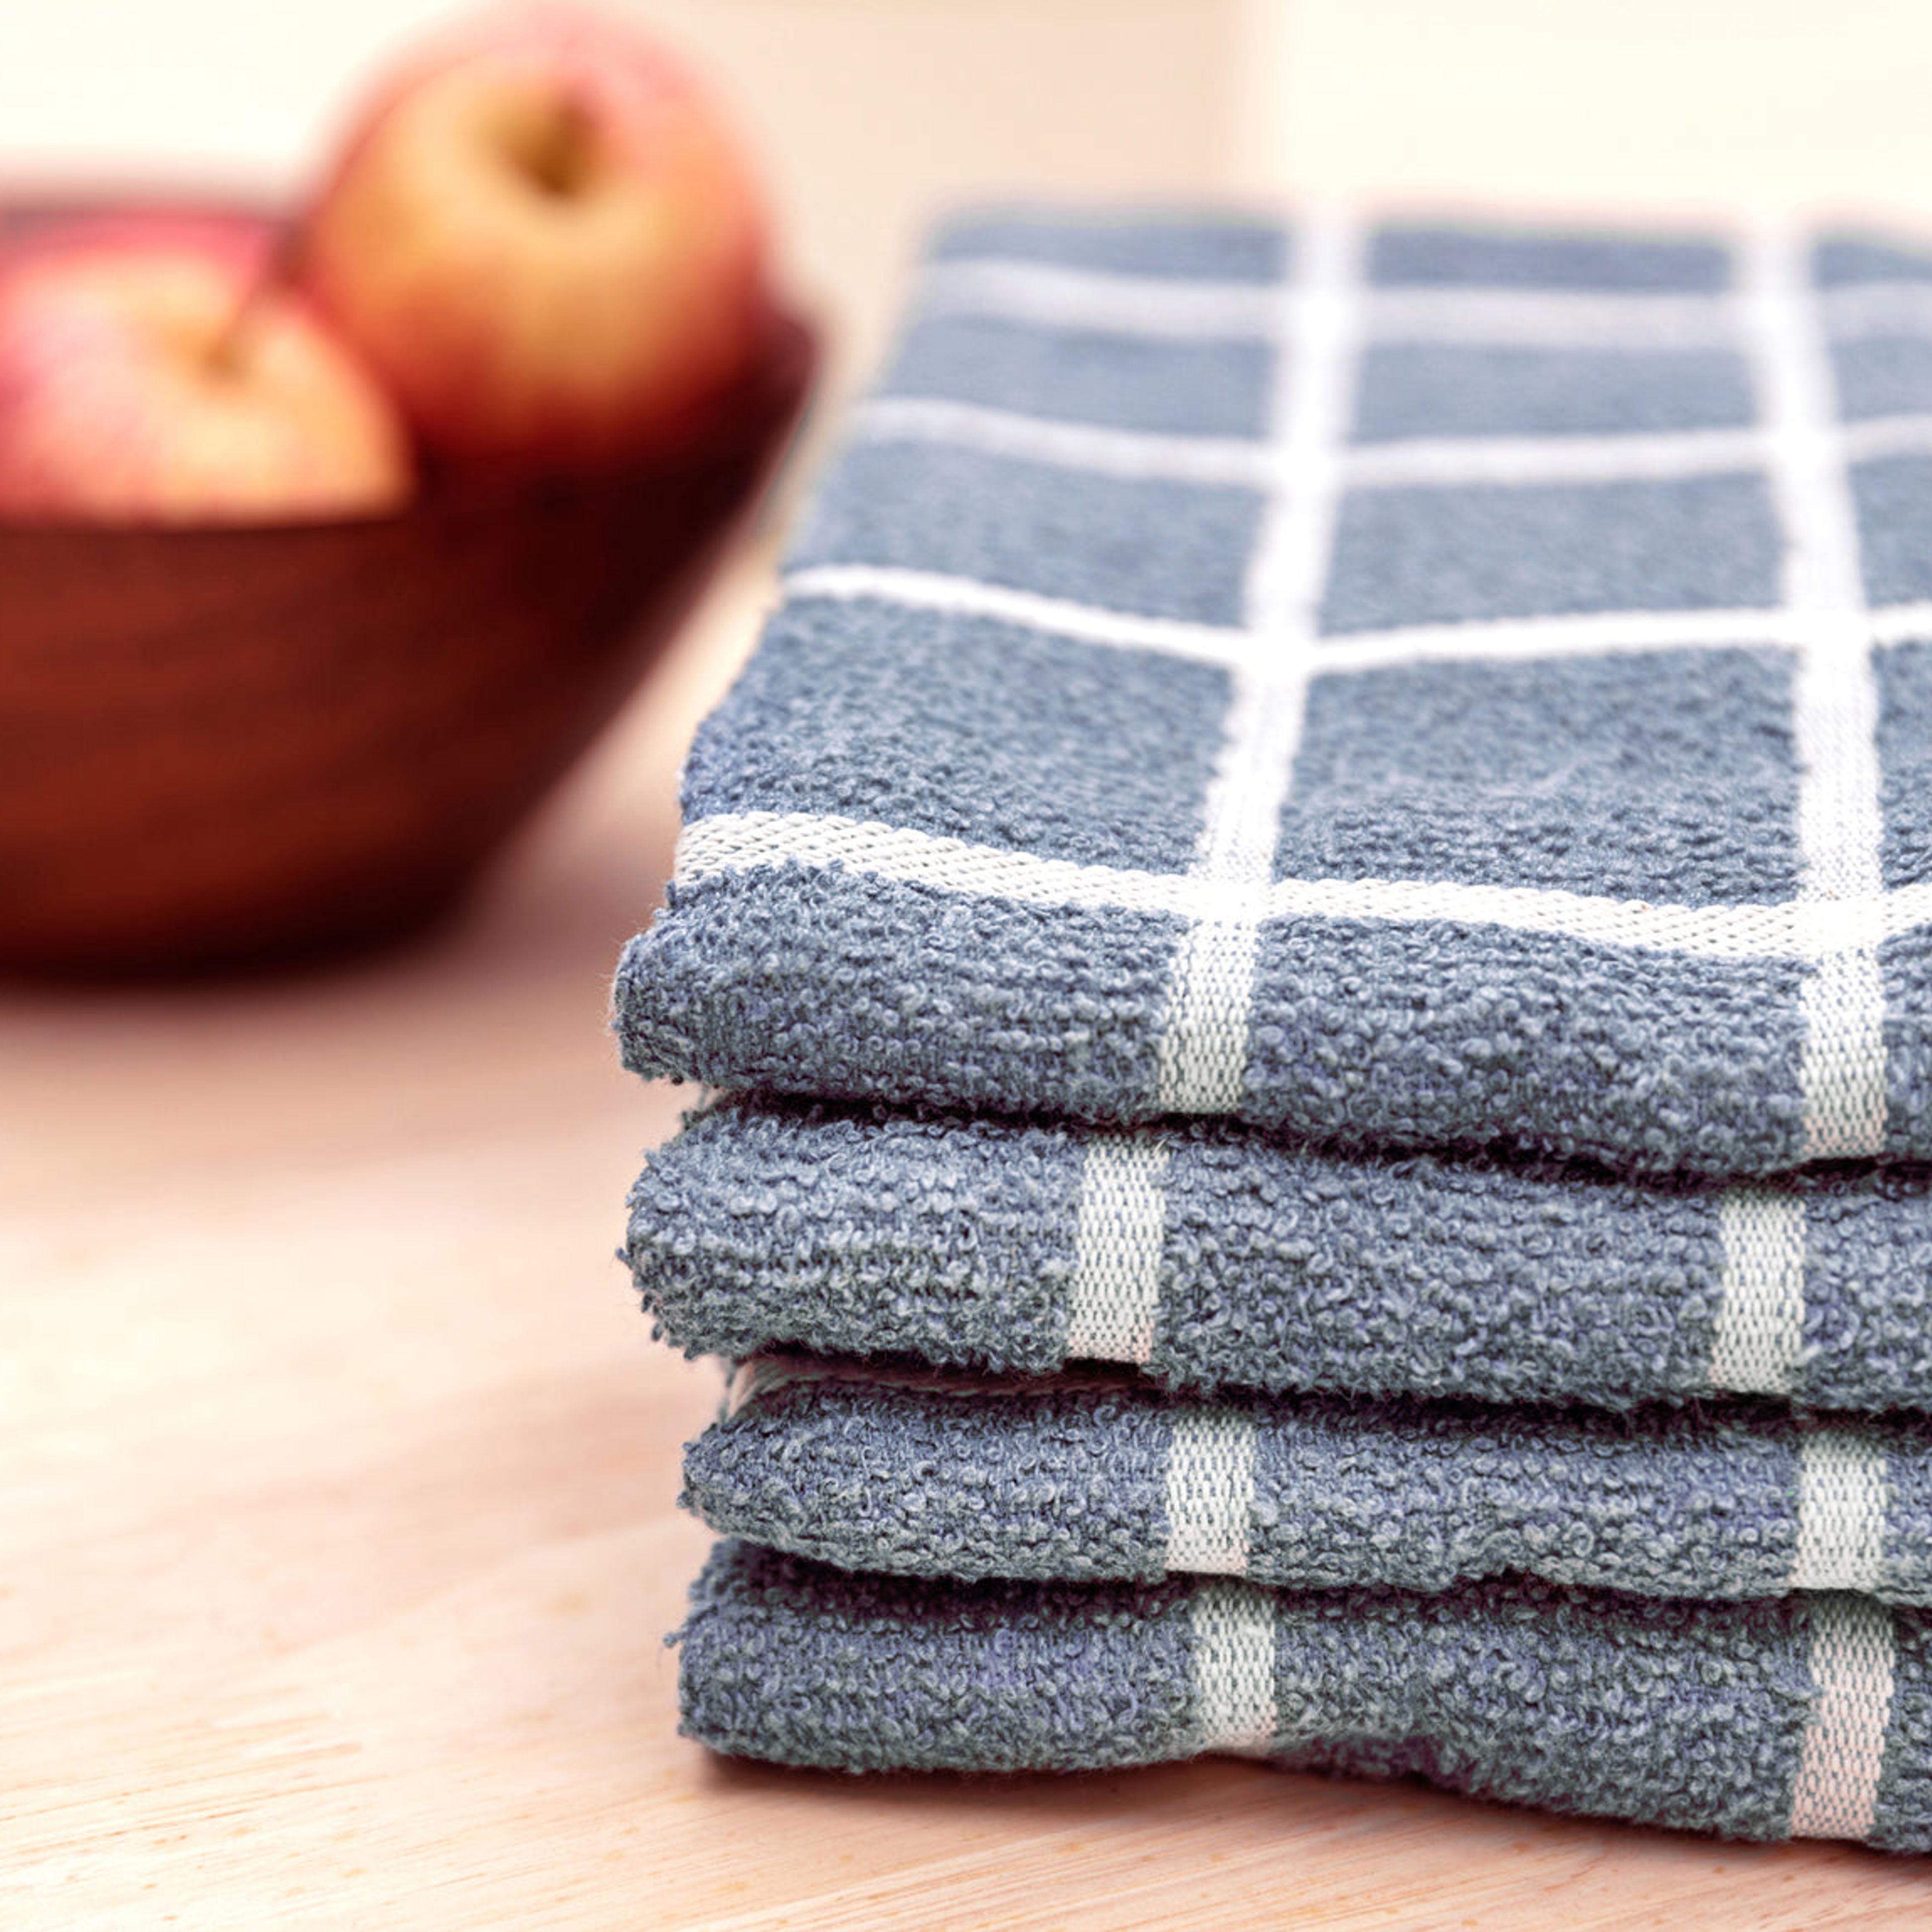 https://cdn.prod.marmalade.co/products/3840x3840/filters:quality(80)/www.meema.co%2Fproducts%2Fkitchen-towels-terry-set-of-3%2F1610061041%2FIMG_0084.jpg